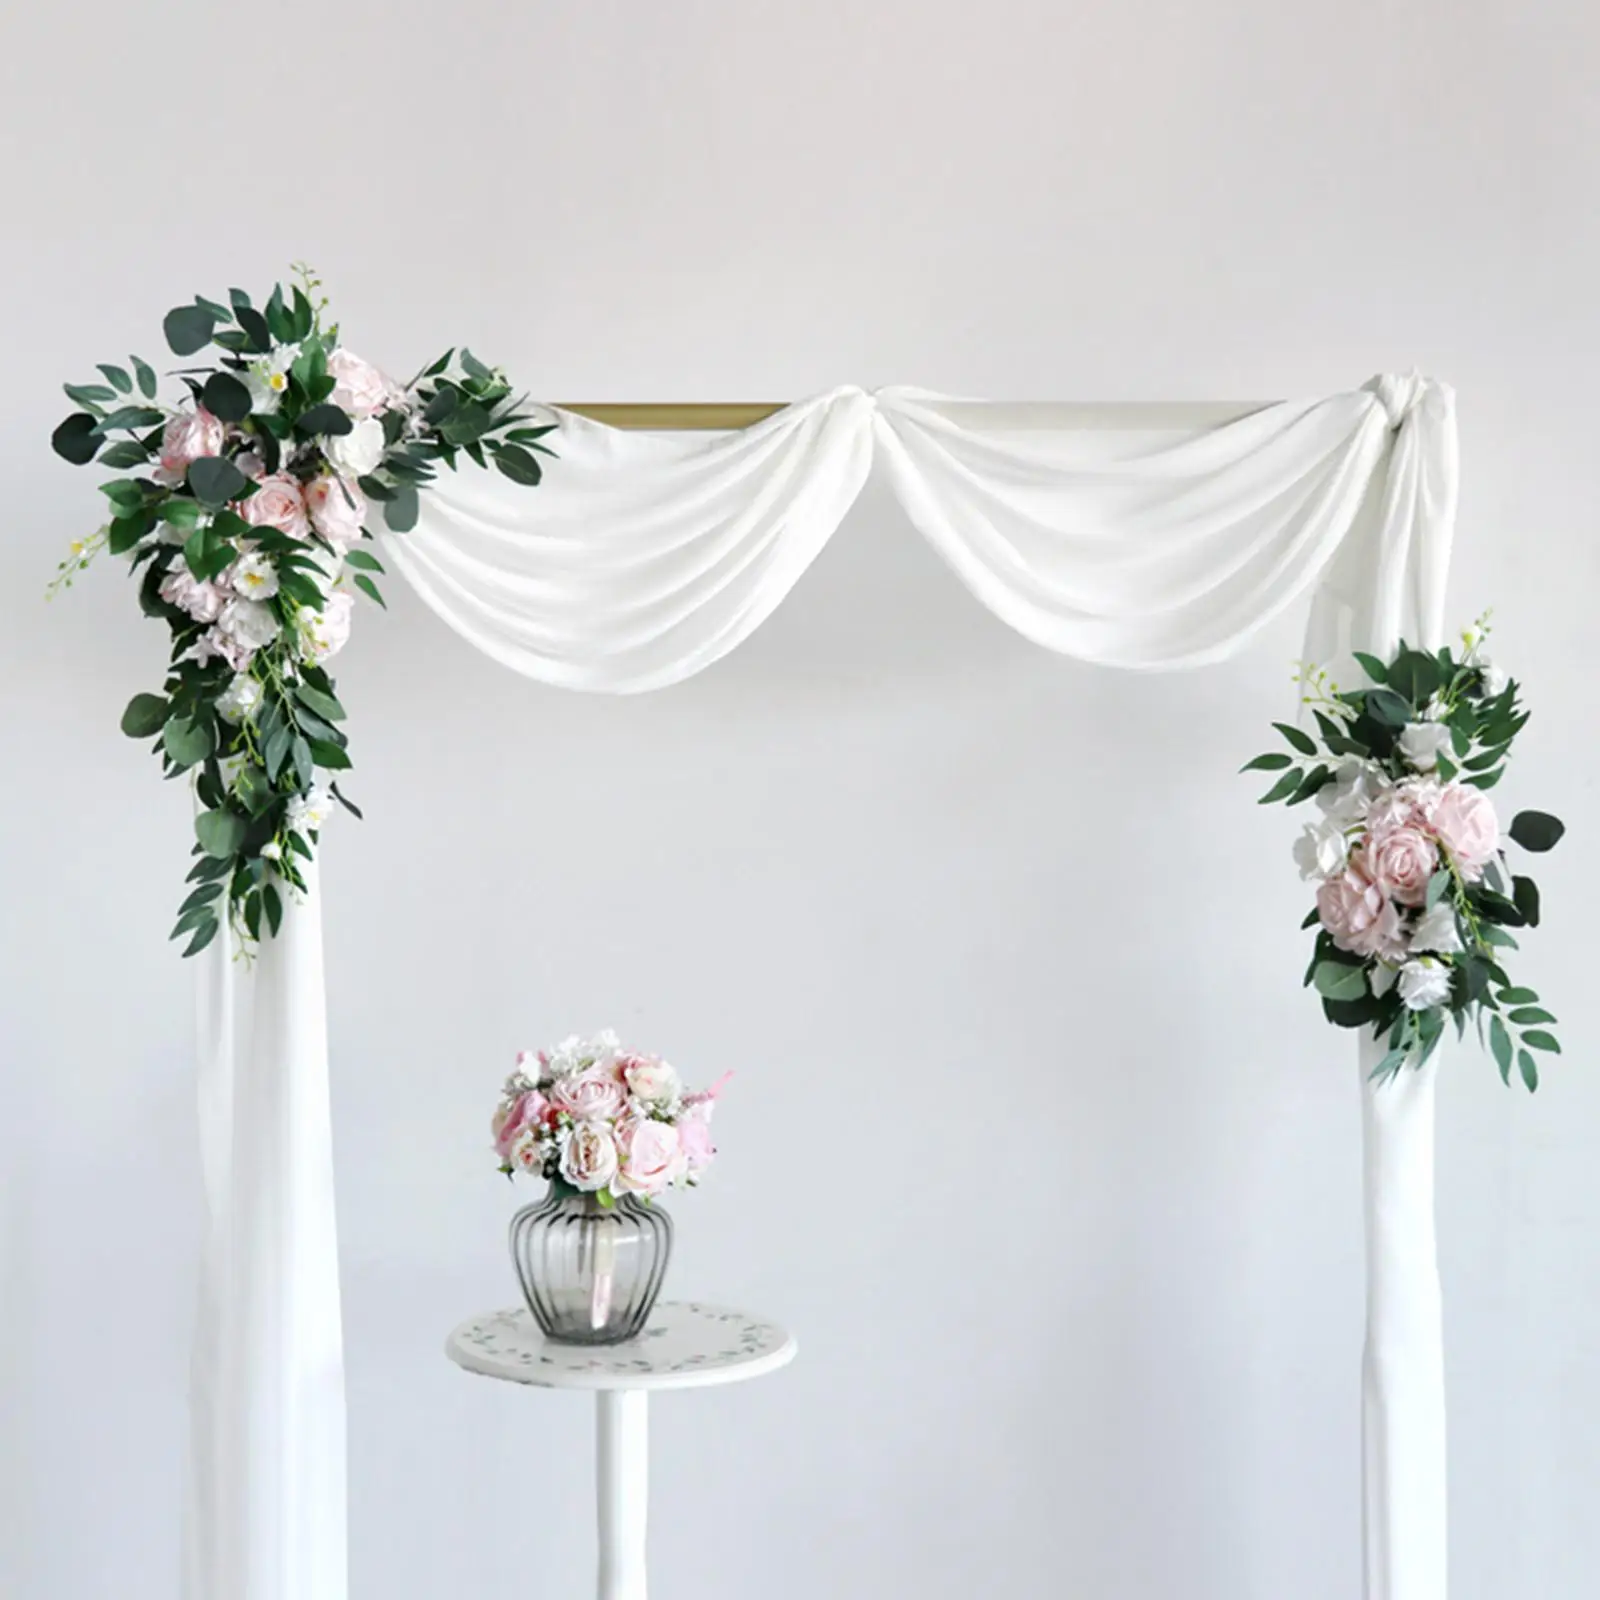 2x Artificial Wedding Arch Flowers Floral Arrangement Ceremony White Draping Fabric Party Greenery Arbor Decor 